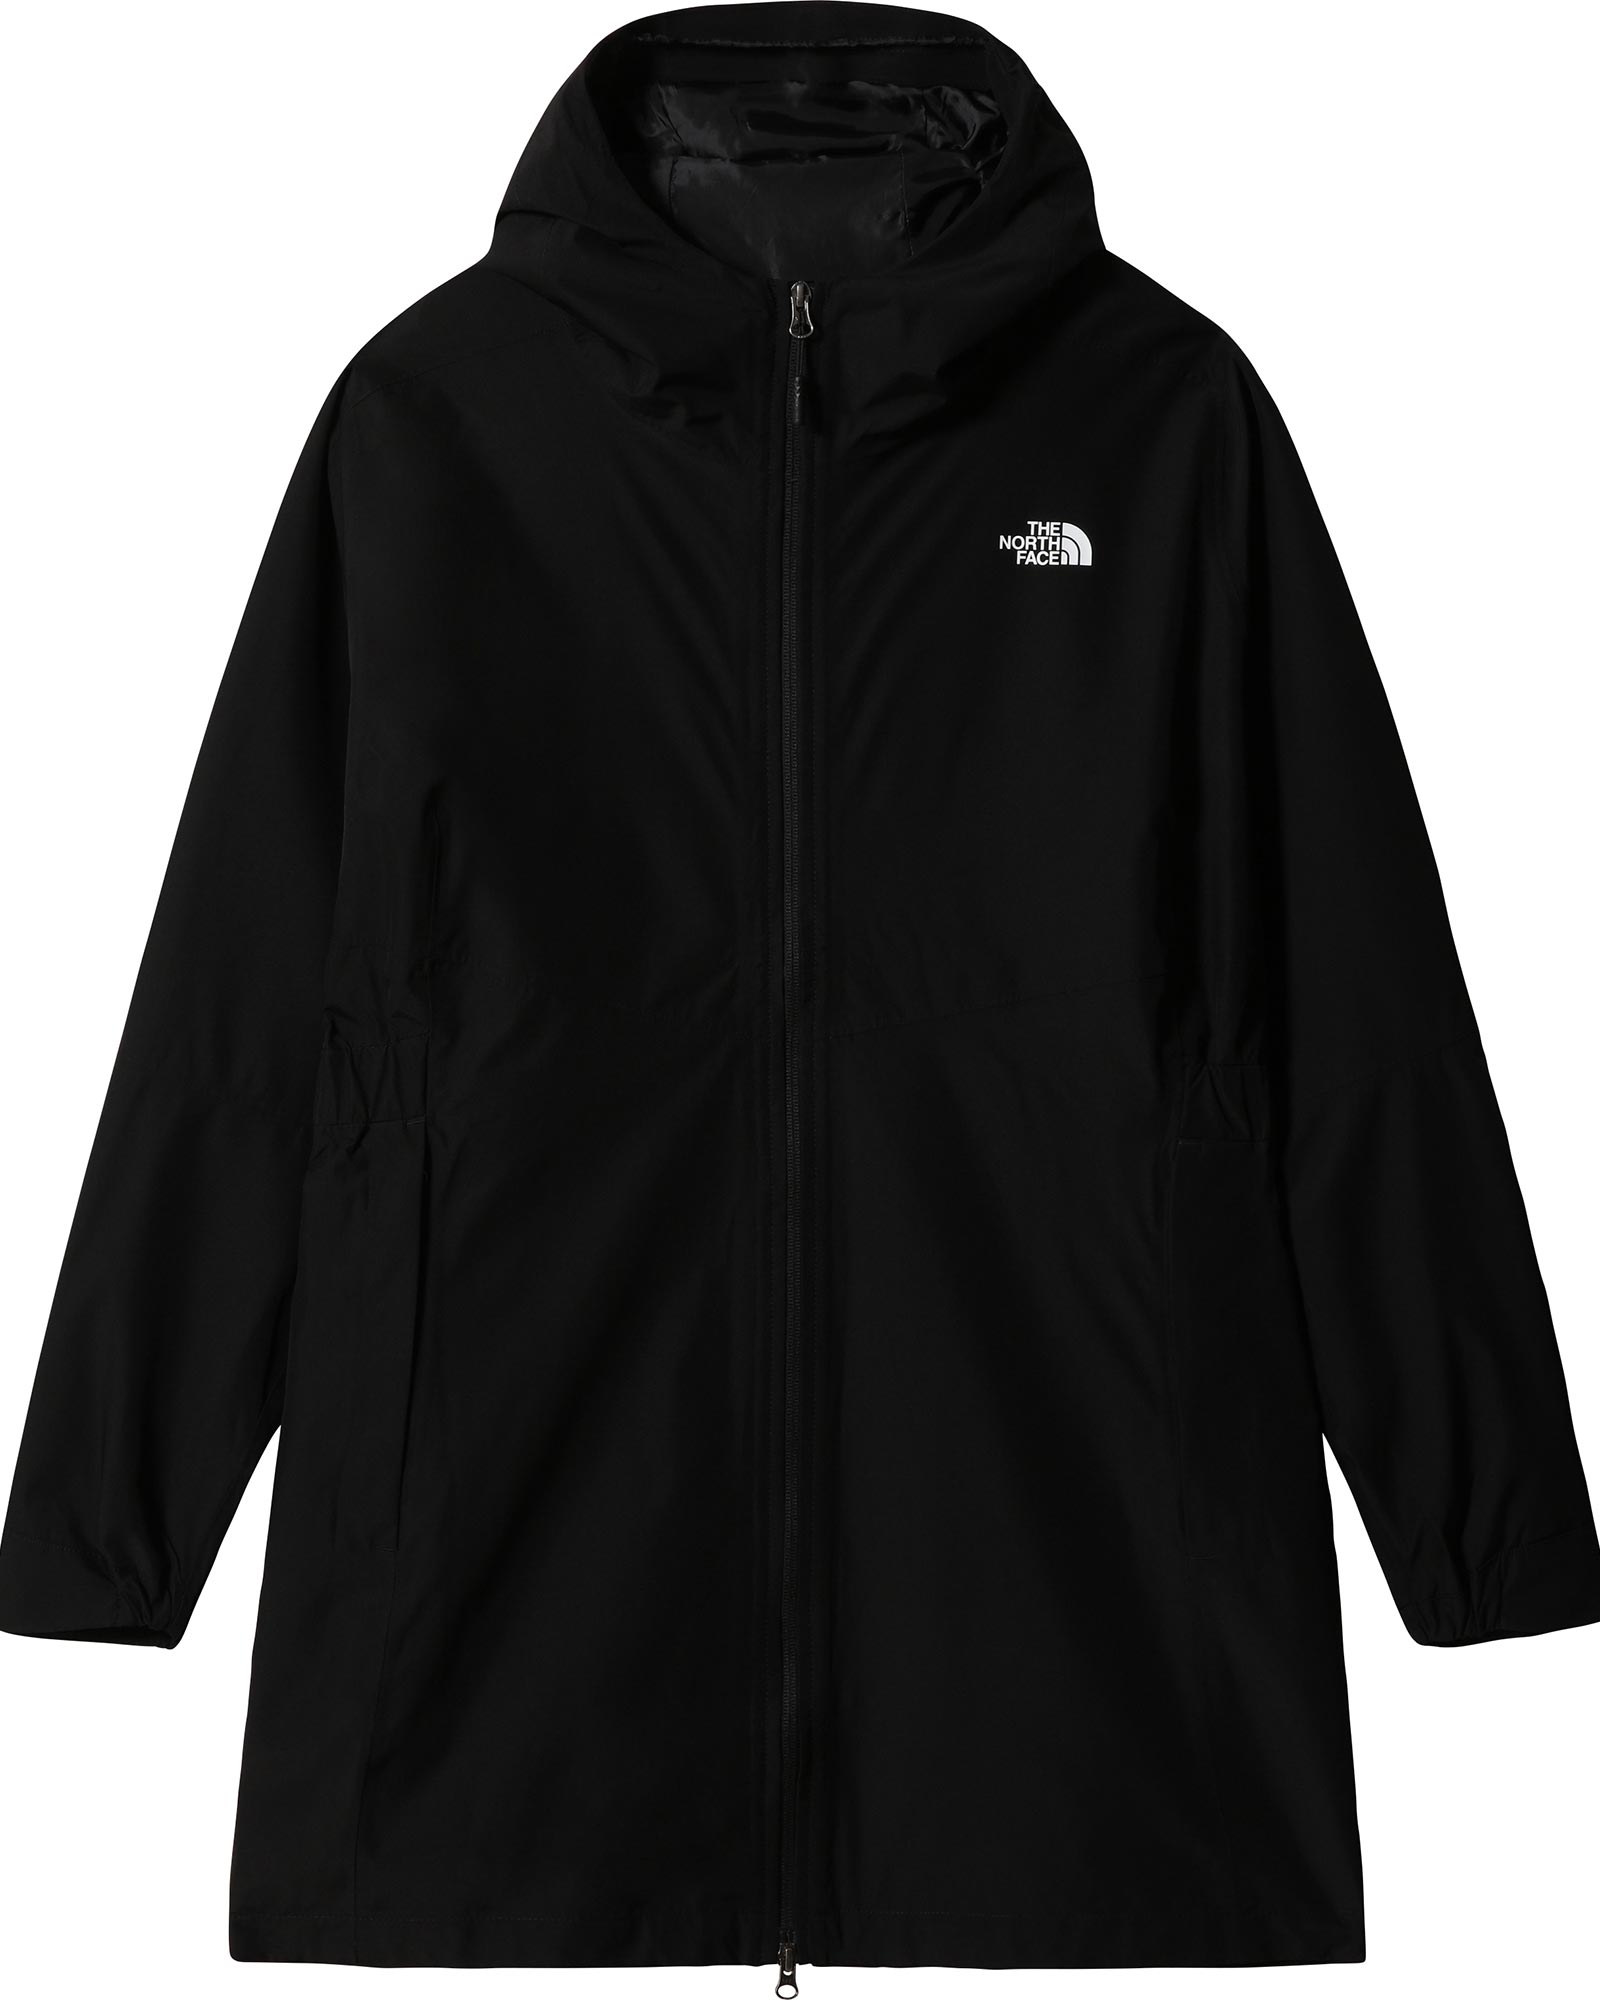 The North Face Hikesteller Plus Womens Parka Jacket